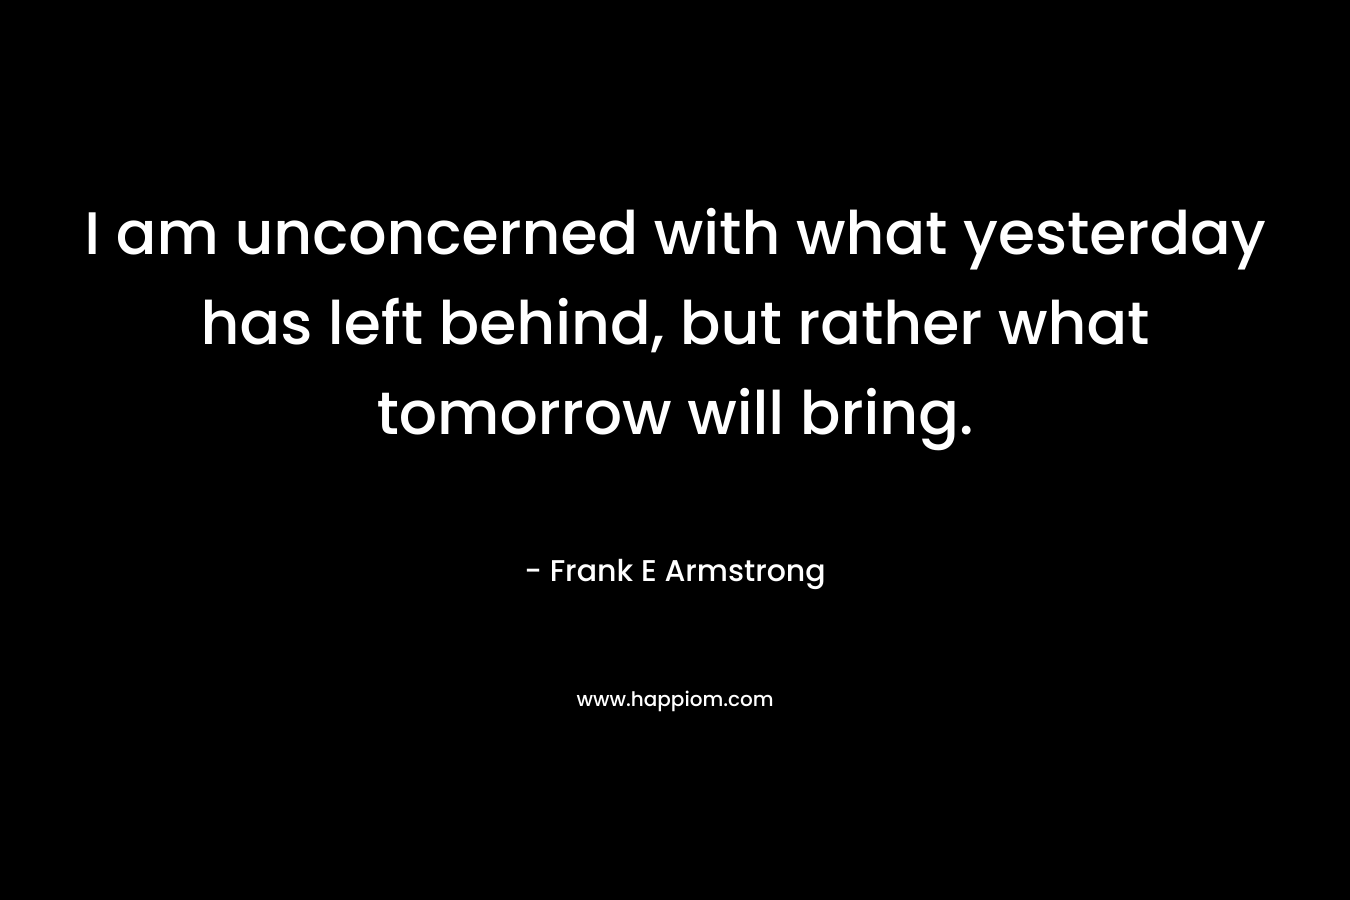 I am unconcerned with what yesterday has left behind, but rather what tomorrow will bring. – Frank E Armstrong